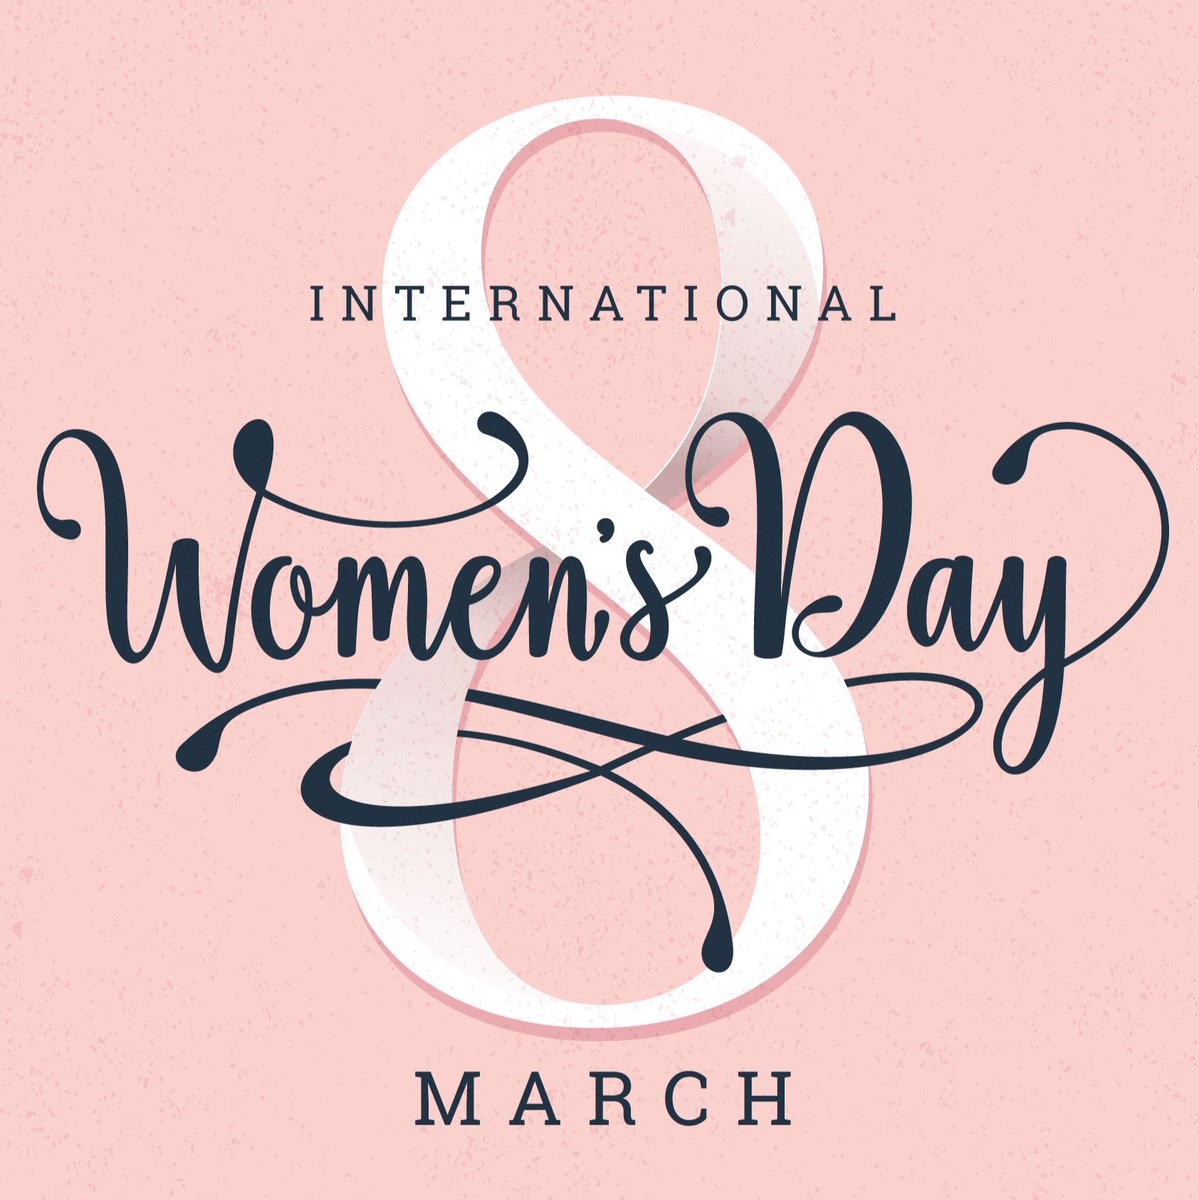 Today we shine a light on the contributions of the many women of the ISBD. We celebrate your achievements and will continue to support your work in the field of #bipolardisorders #InternationalWomensDay